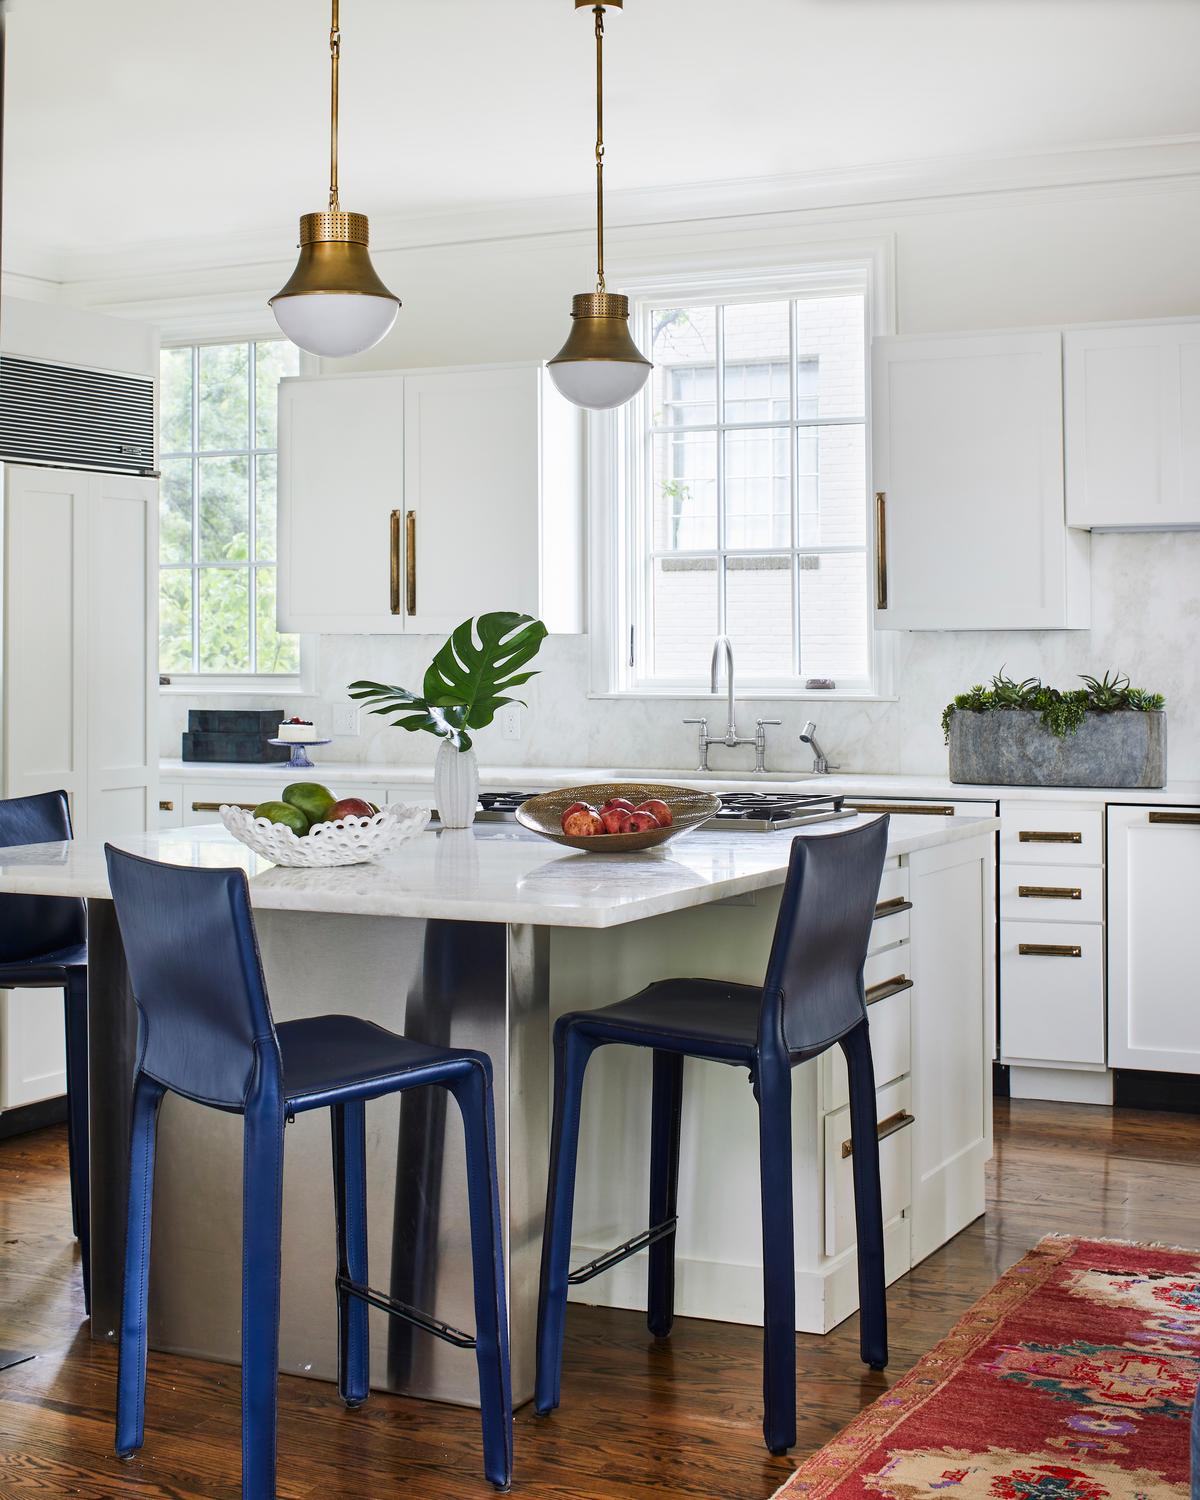 In the kitchen, new lighting, countertops, and cabinet hardware were installed to maximize functionality. A new marble countertop adds elegance, complementing the brass hardware while contrasting with the sapphire-blue bar stools. (Laurey Glenn)